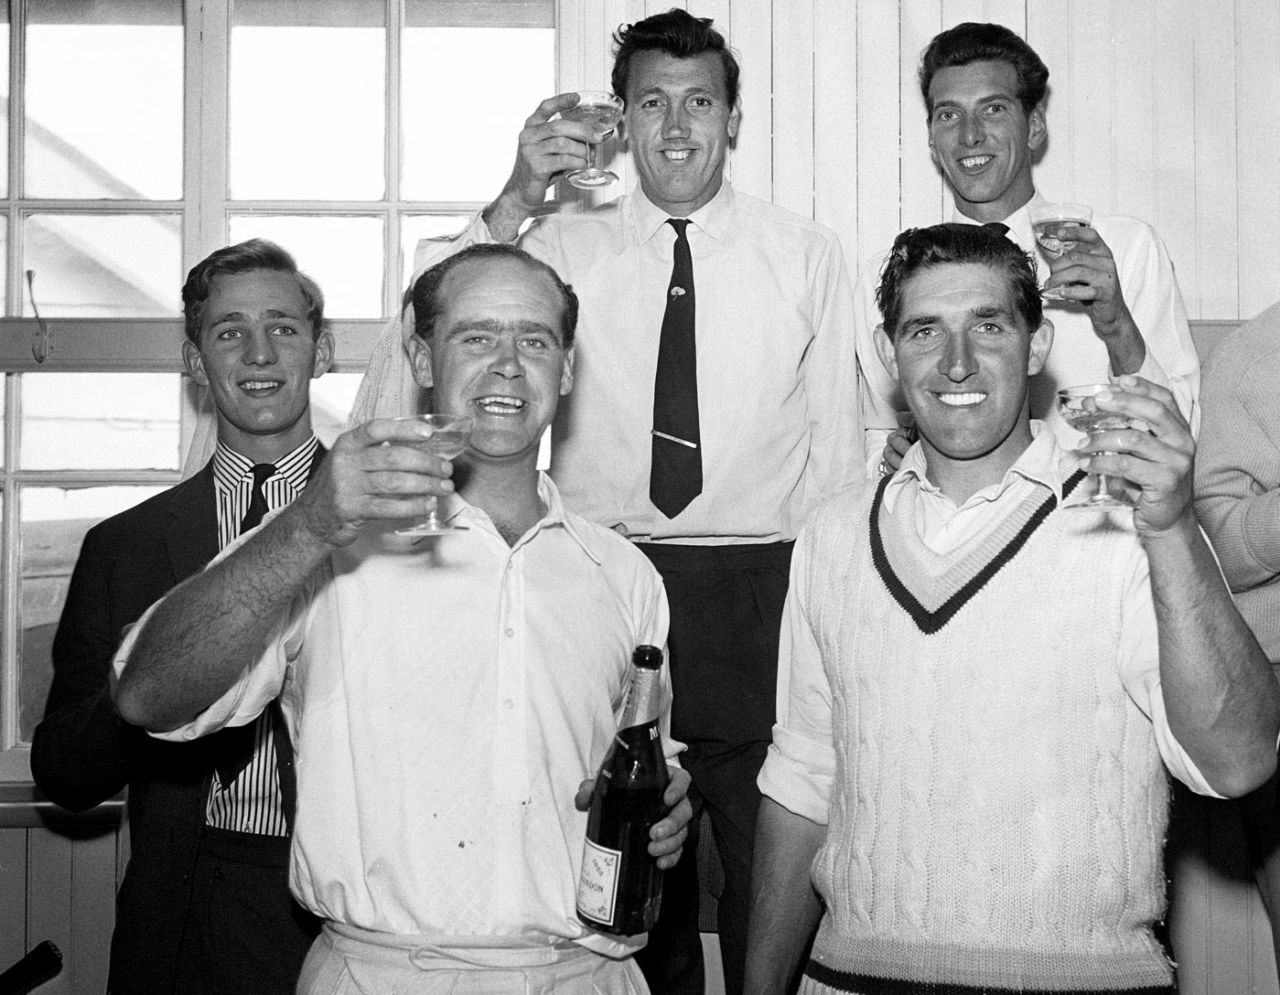 Brian Close, Vic Wilson, Melville Ryan and Don Wilson celebrate the victory over Glamorgan, County Championship, Yorkshire v Glamorgan, Harrogate, 3rd day, September 7, 1962